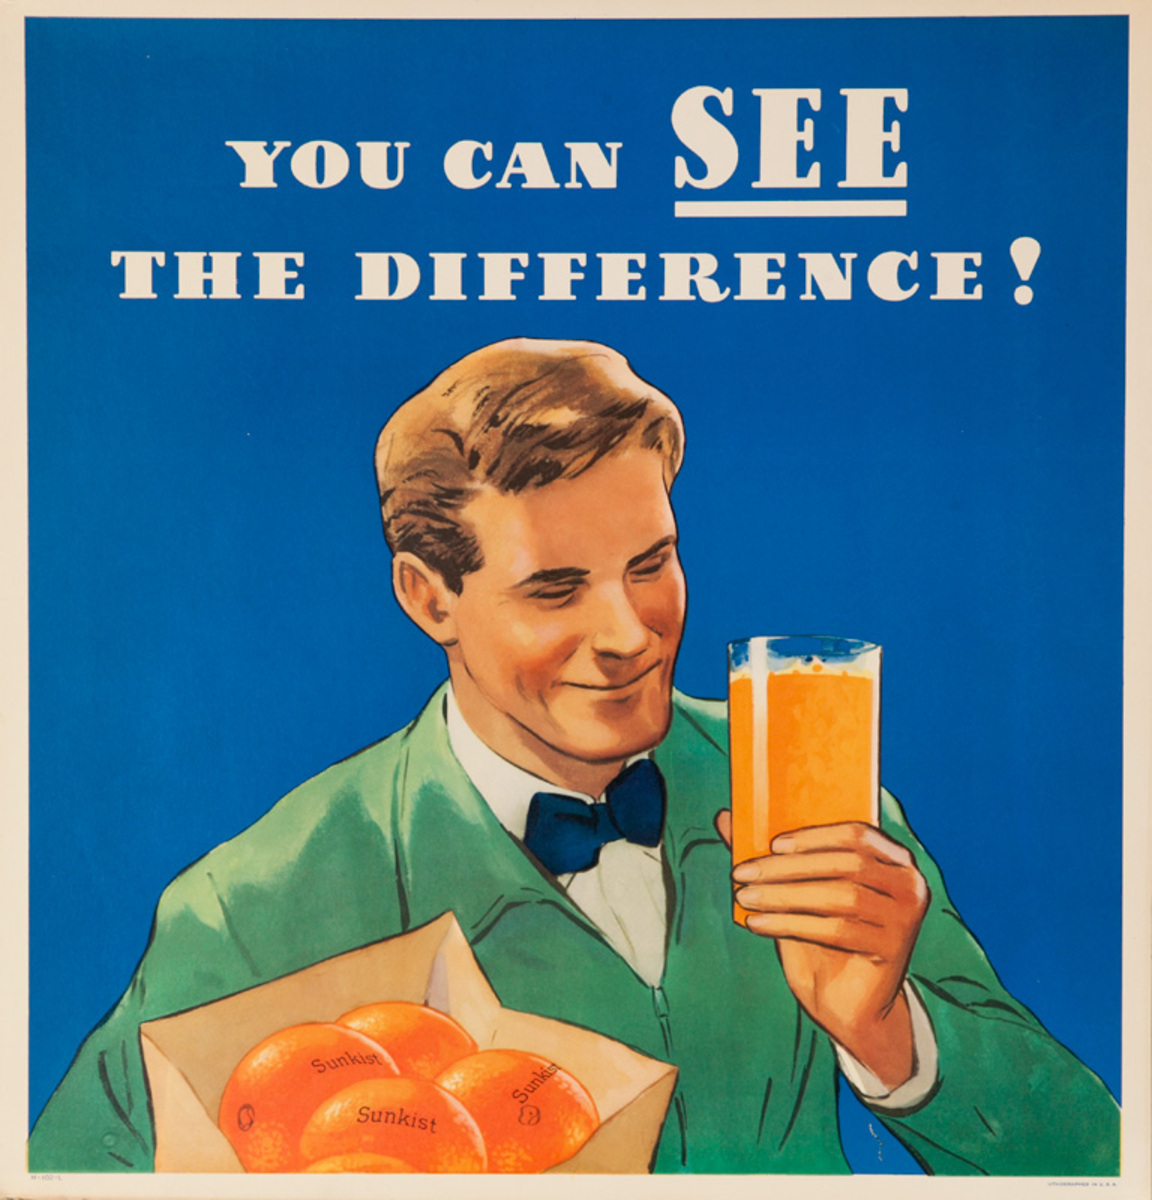 Sunkist Oranges Original Advertising Poster, You Can See the Difference